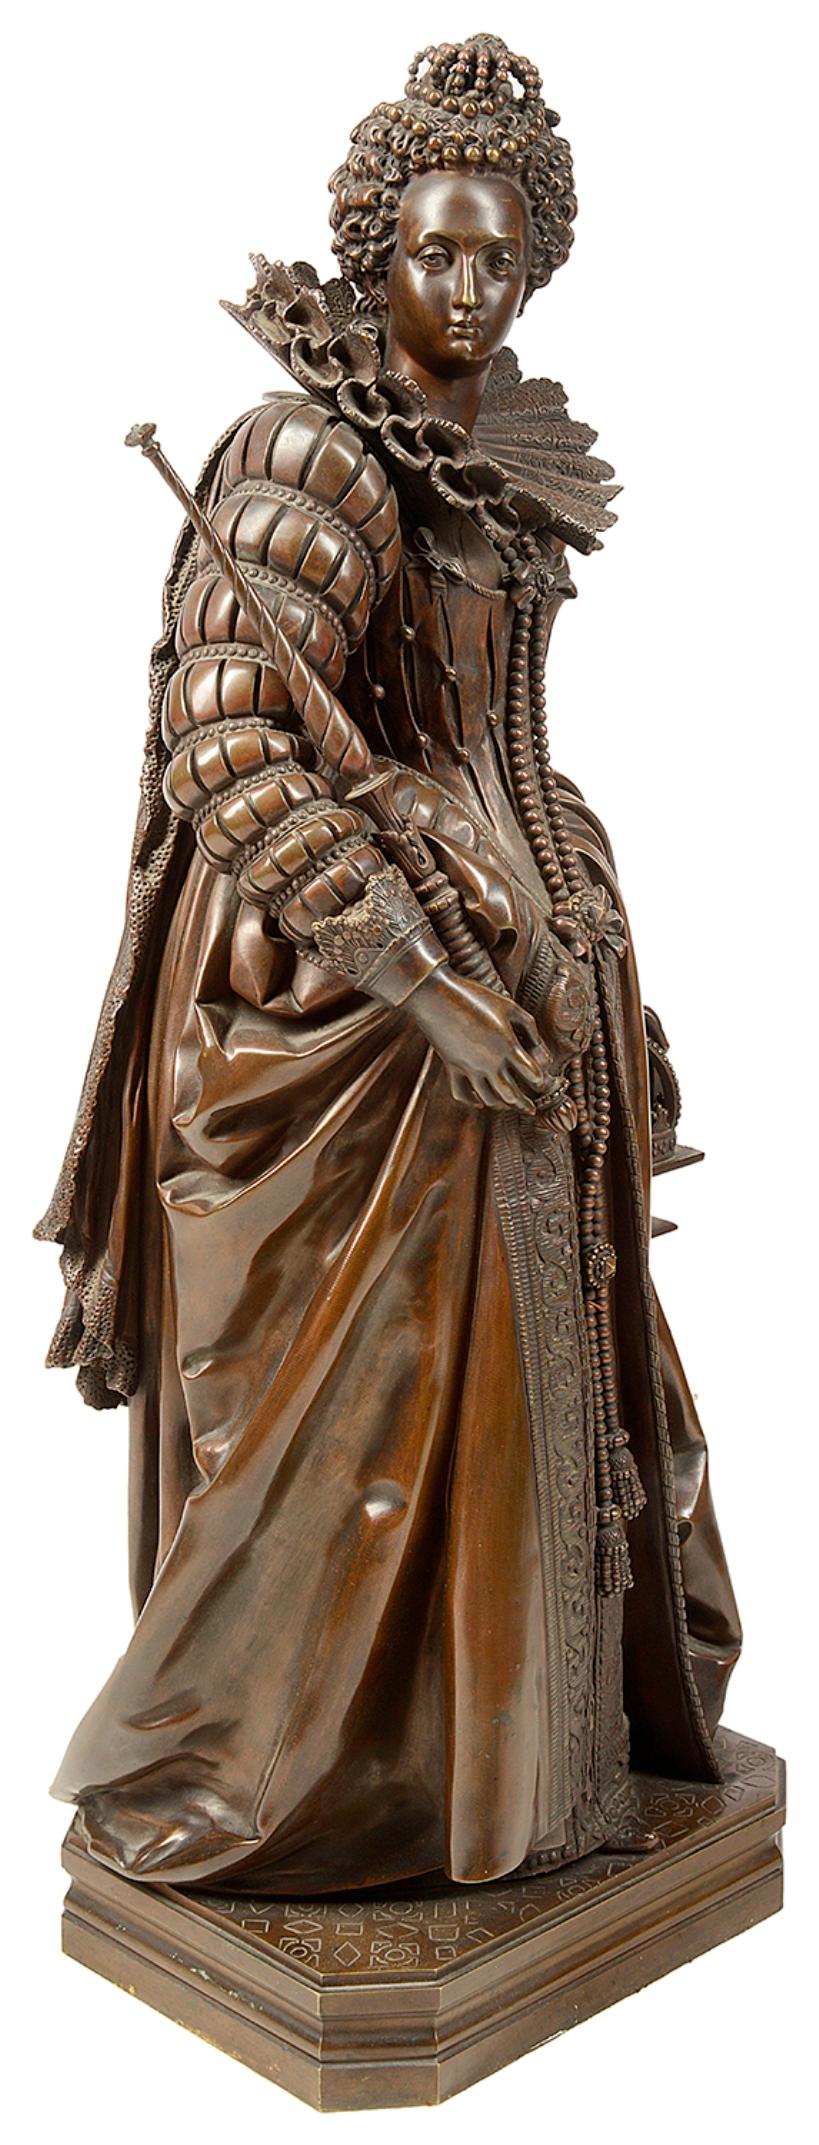 A fine quality 19th century bronze study of Queen Elizabeth 1, signed; Moreau Mathurin, 1822-1912.